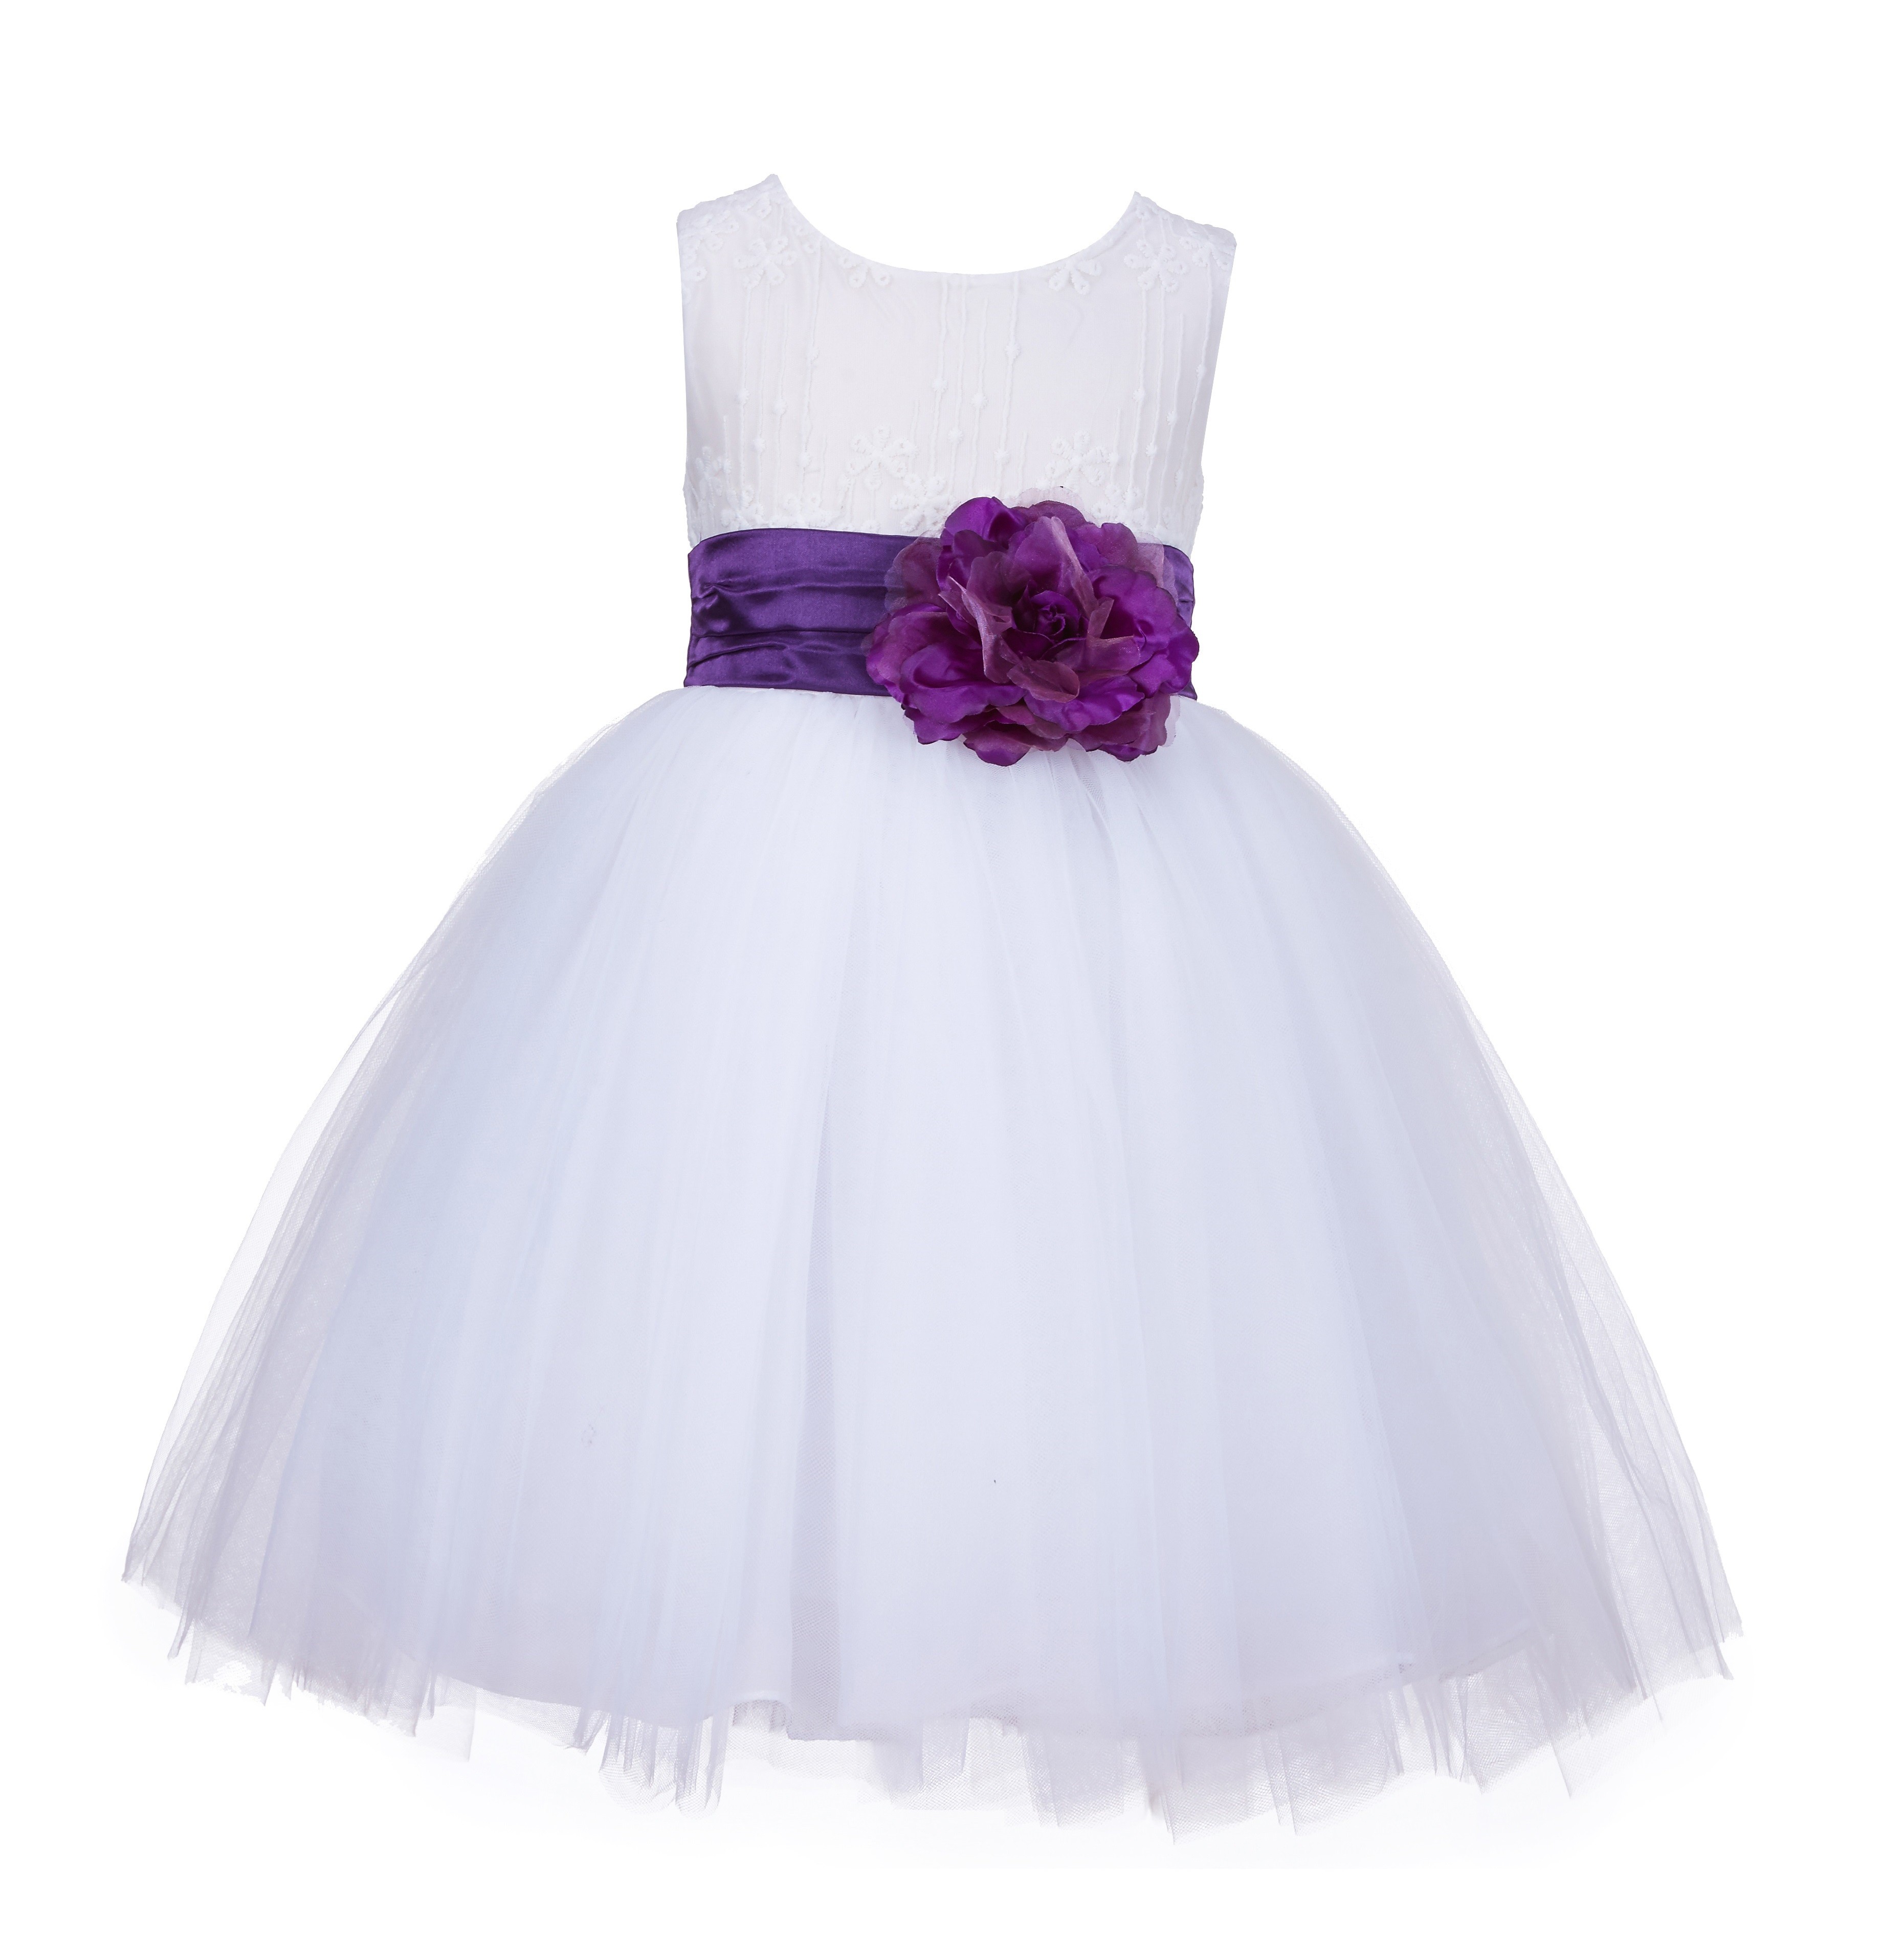 White/Purple Lace Embroidery Tulle Flower Girl Dress Wedding 118